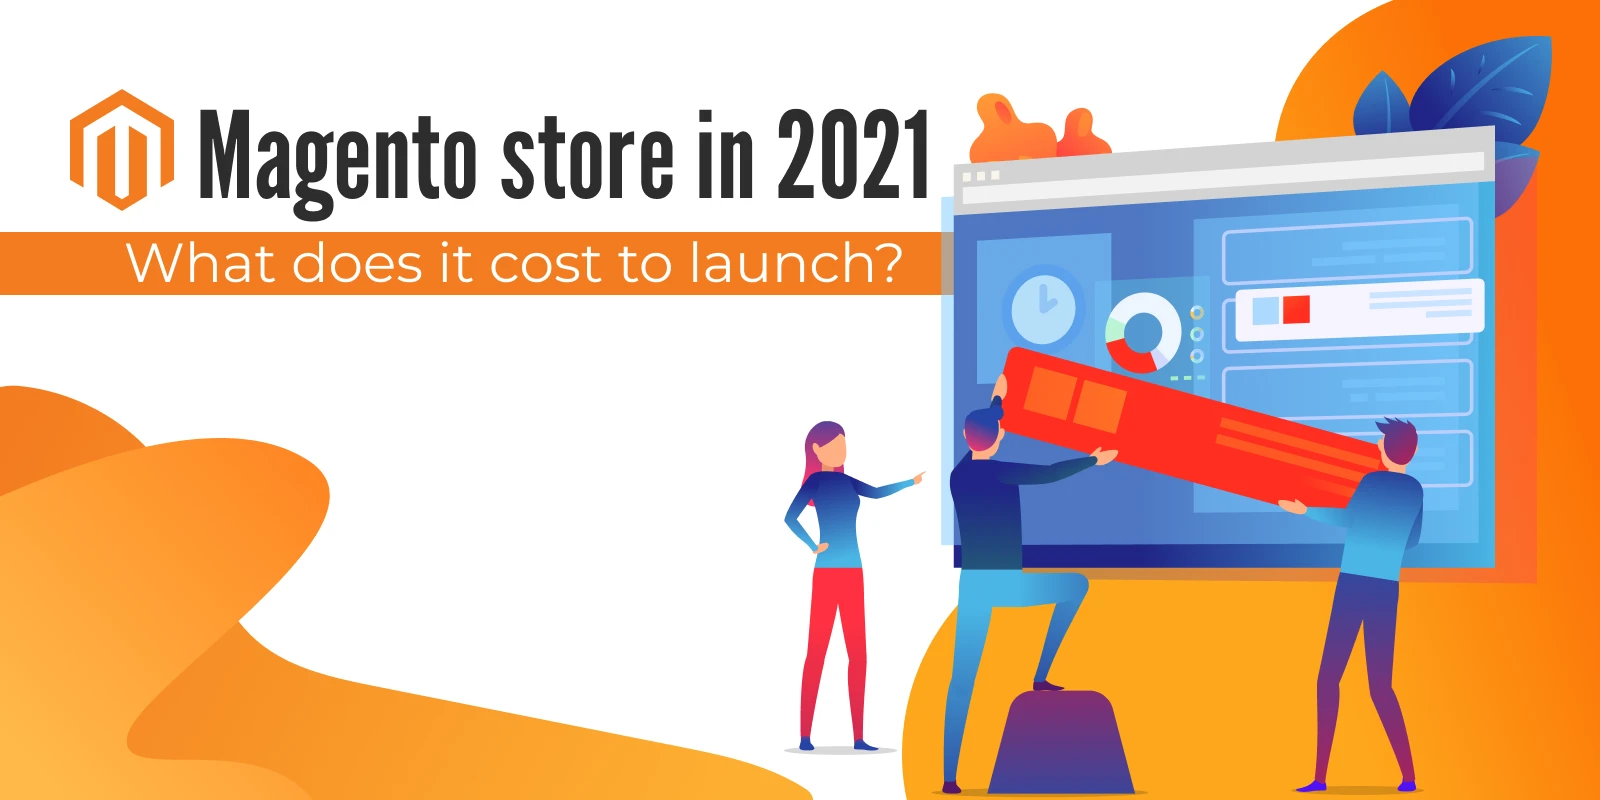 What does it cost to launch a Magento store in 2021?